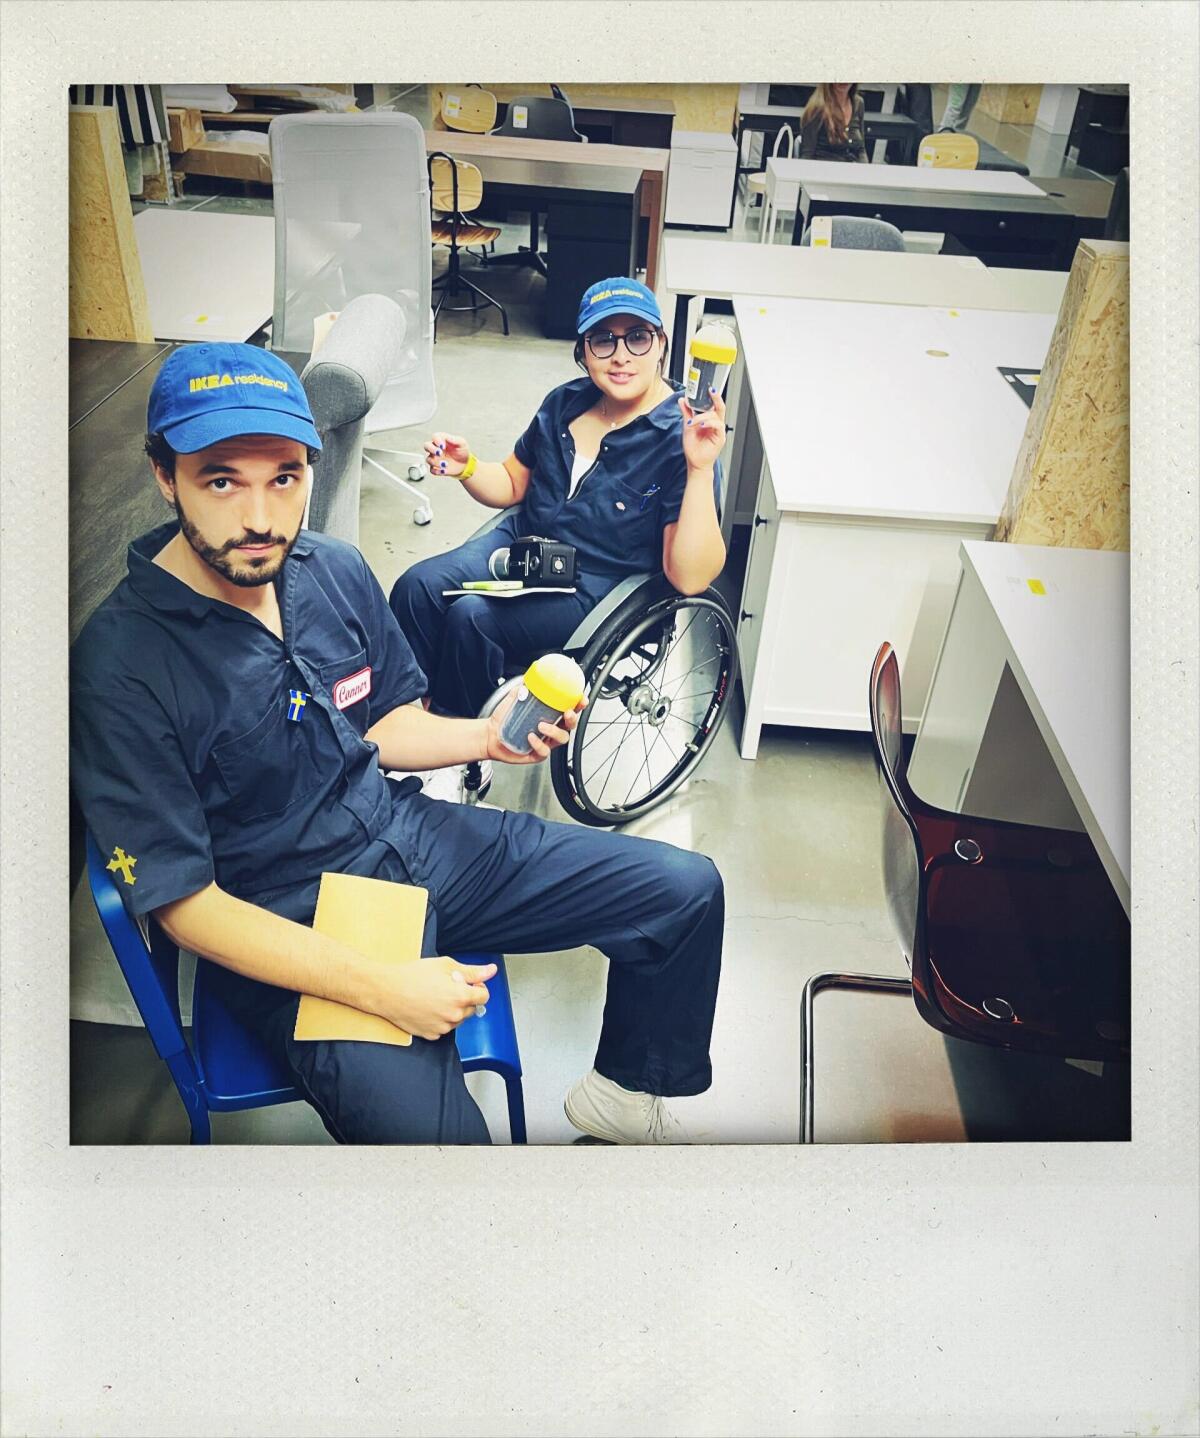 Two people in blue coveralls and blue baseball hats pose for a portrait at Ikea.